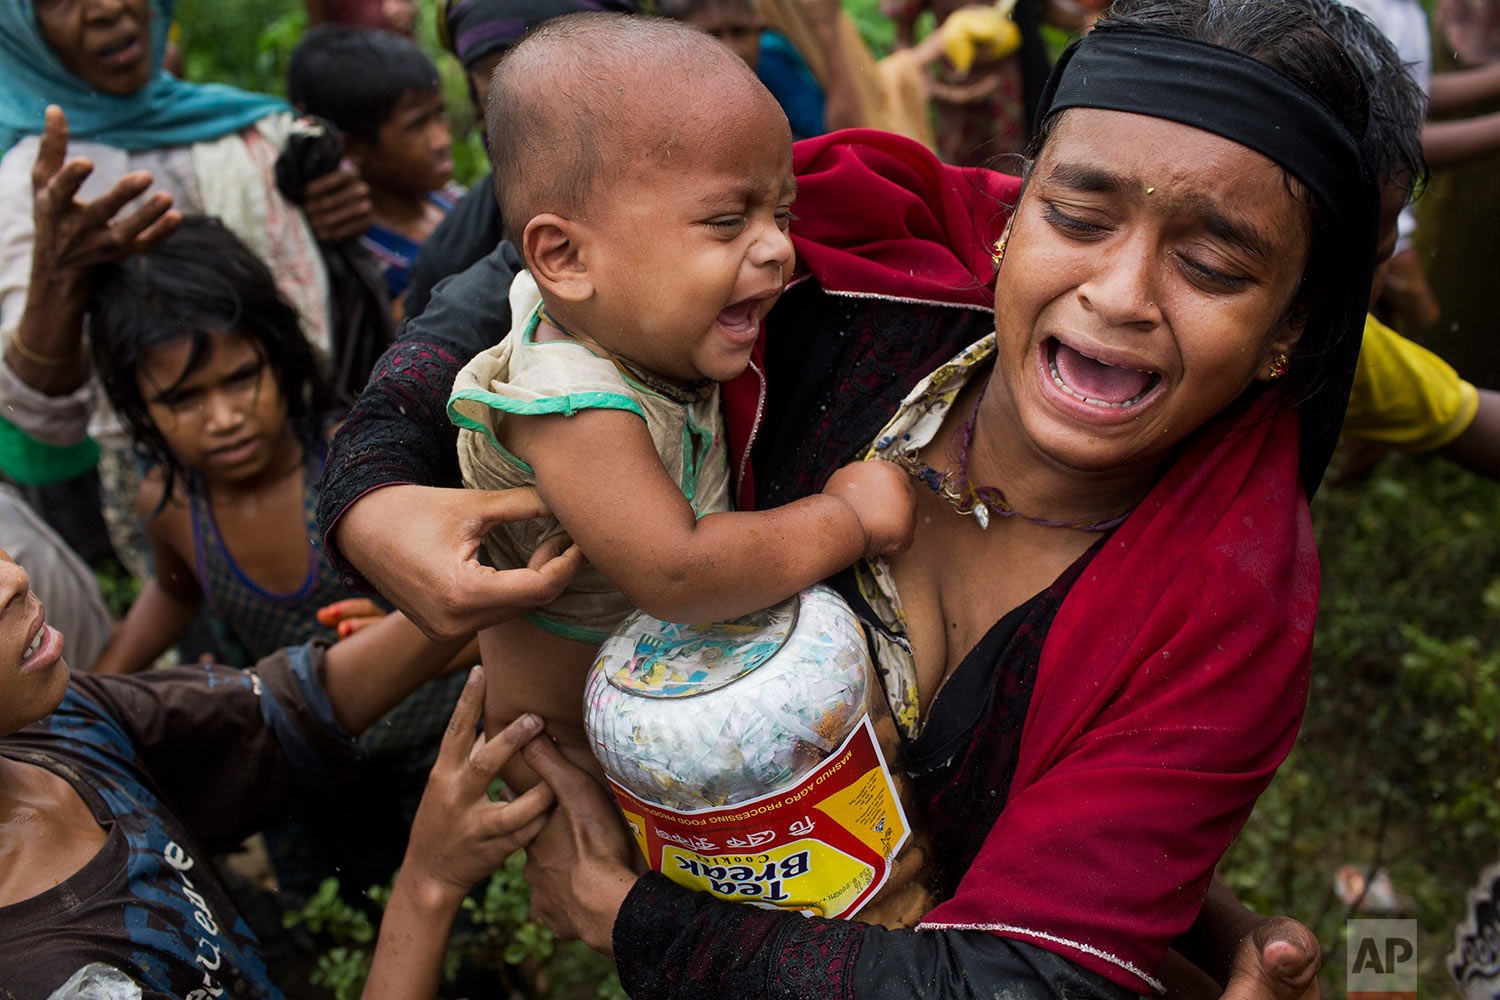  A Rohingya woman breaks down after a fight erupted during food distribution by local volunteers at Kutupalong, Bangladesh, Friday, Sept. 8, 2017. (AP Photo/Bernat Armangue) 